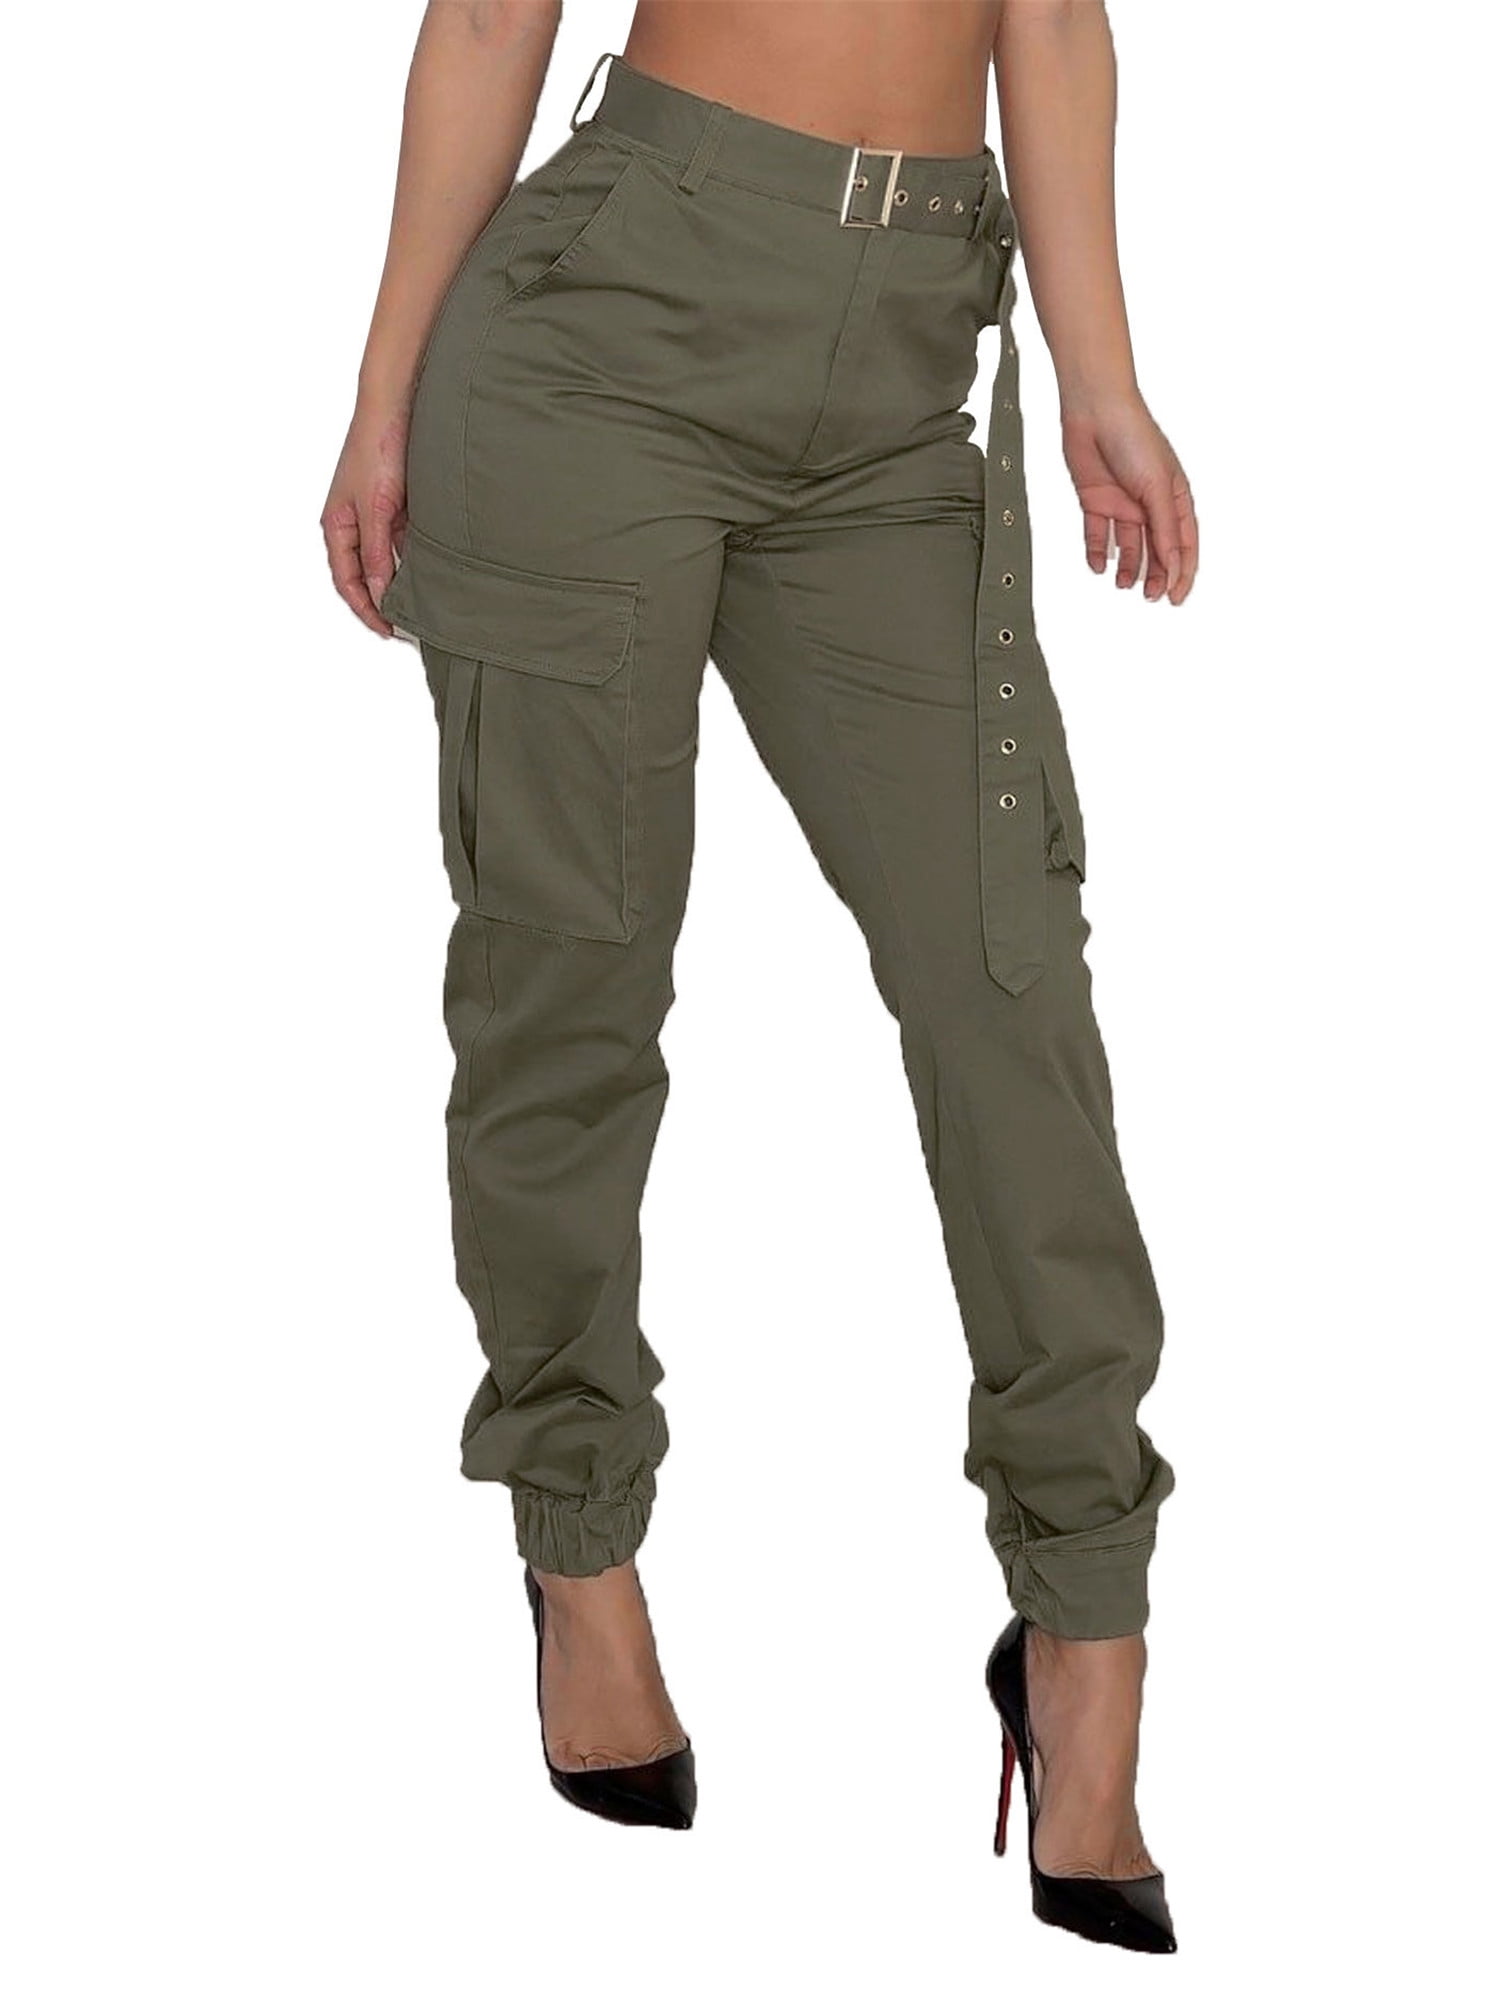 Aunavey Women's Casual Military Army Cargo Combat Work Pants with ...